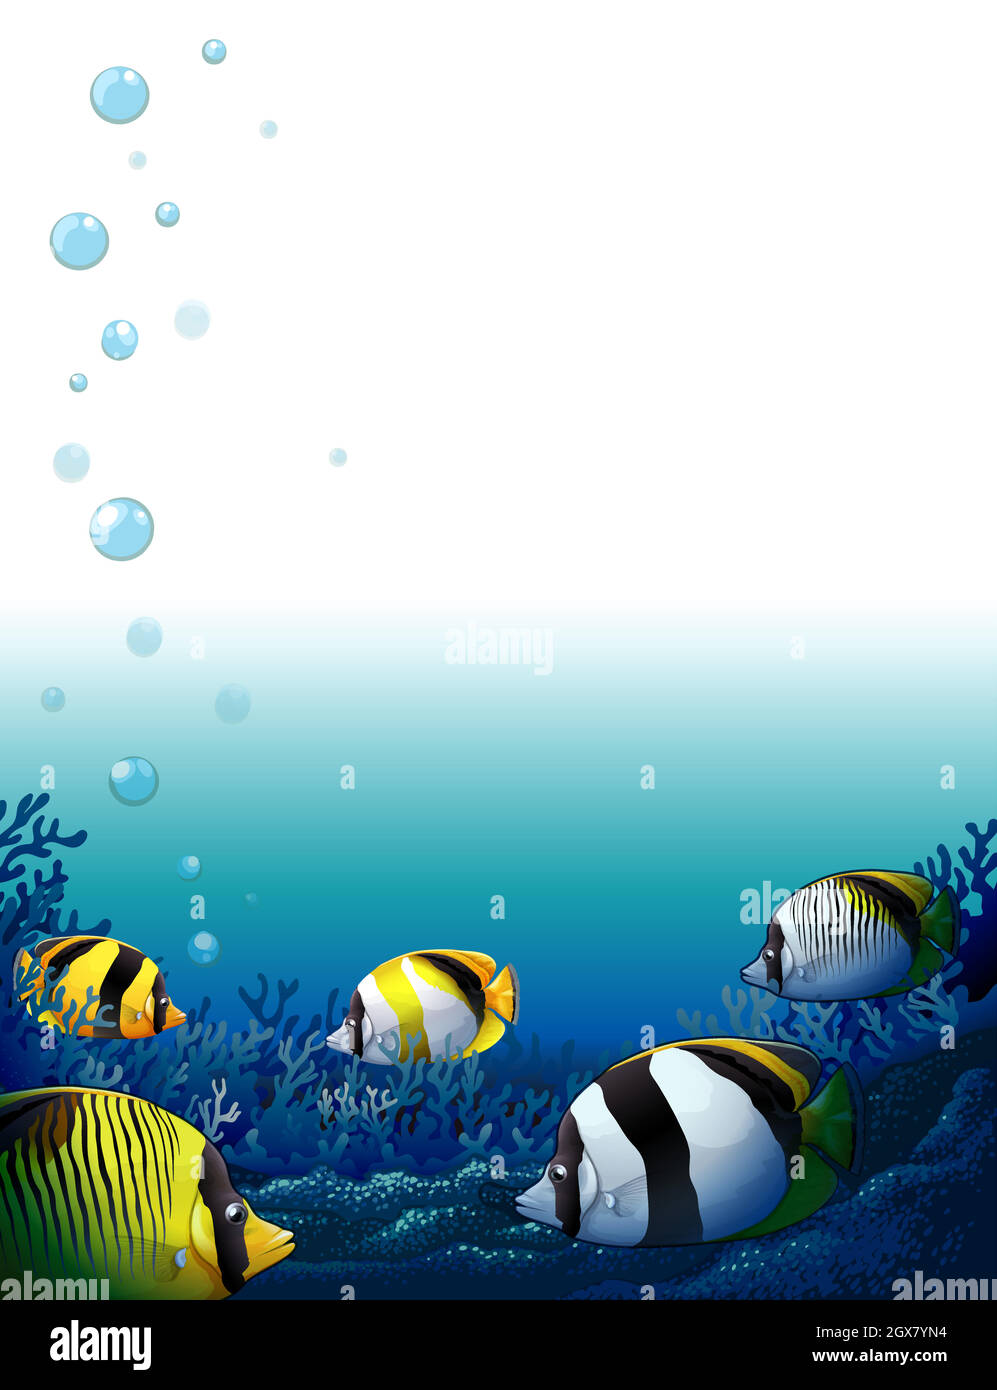 Fishes under the sea Stock Vector